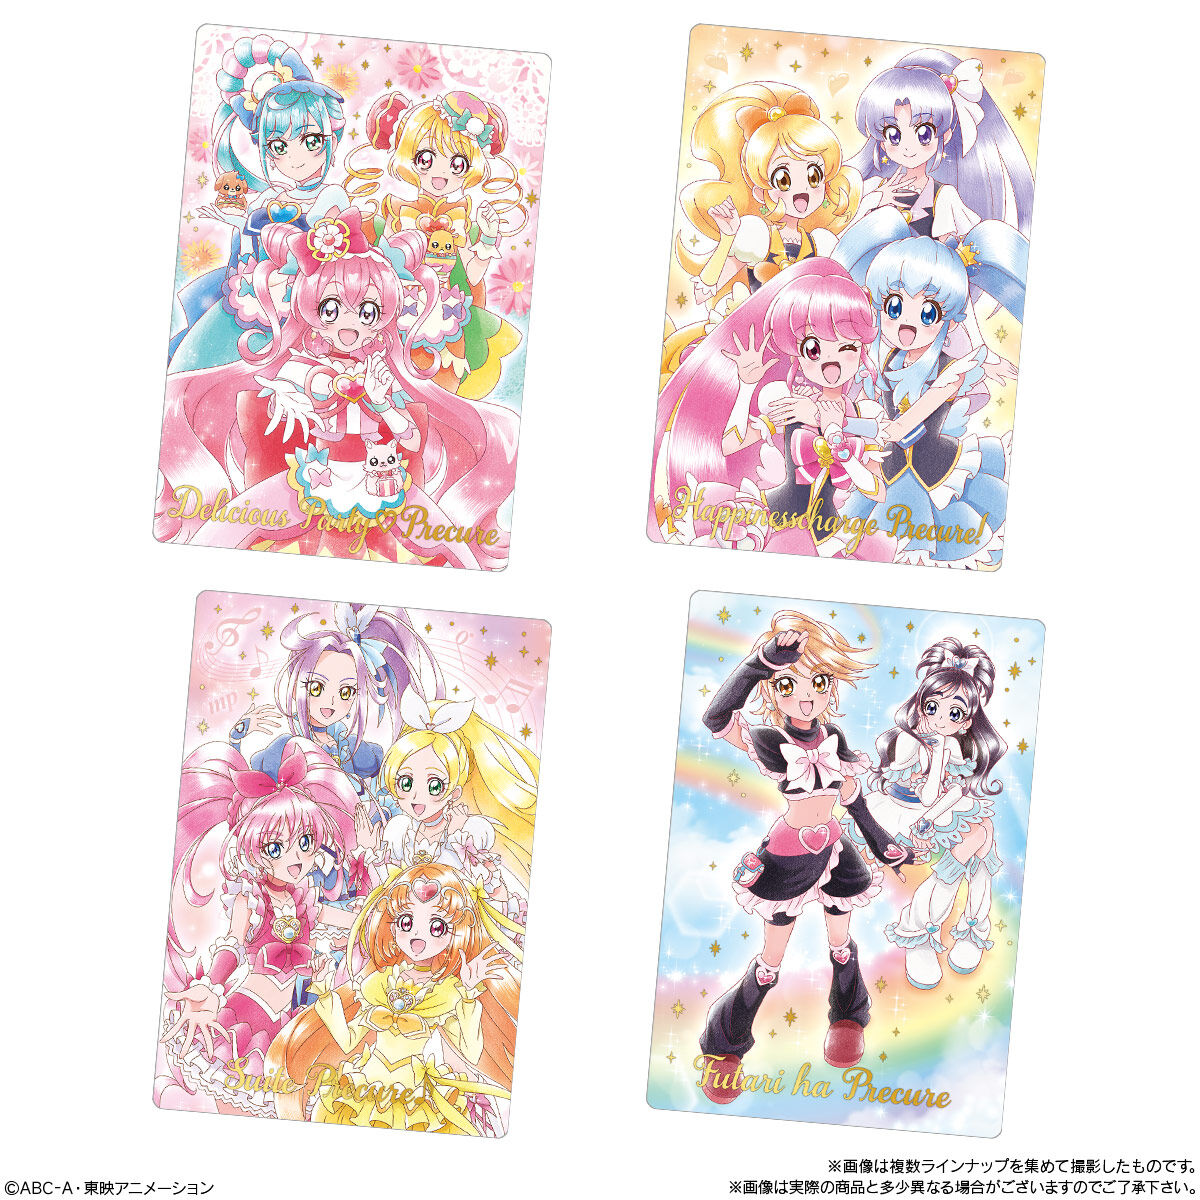 PRECURE Wafer Card Vol.5 Candy Toy BANDAI